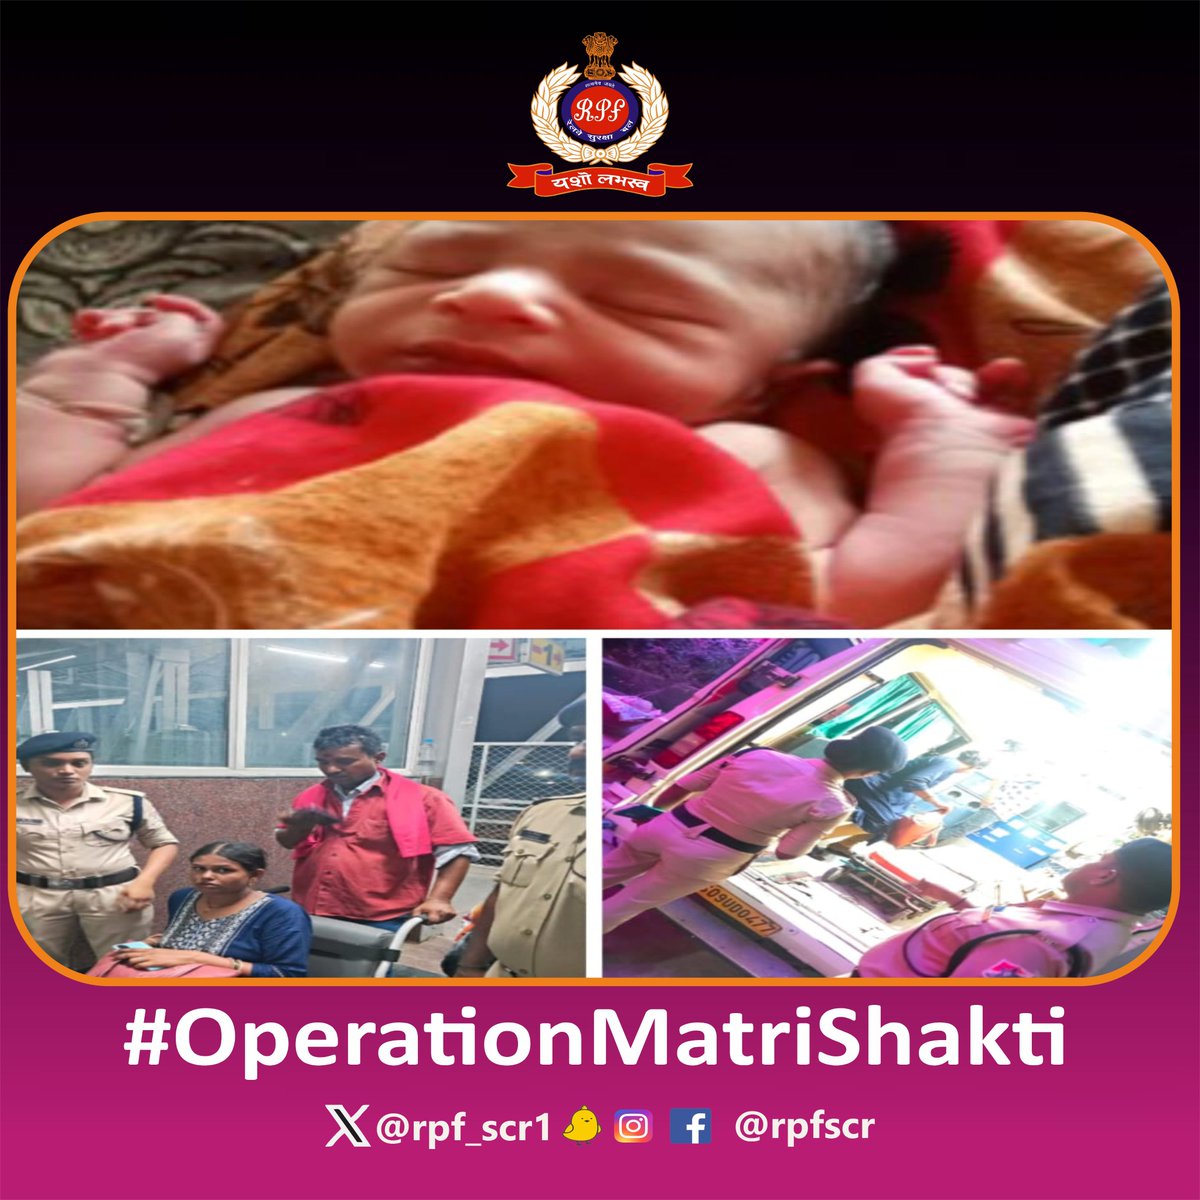 #RPF #Warangal guardians of Wellbeing! Rapid response to a woman in labor pains by sending her to hospital, where she joyfully welcomes her newborn. A testament to our commitment to health and safety. #OperationMatriShakti. @RPF_INDIA @rpfscr_sc @RailMinIndia @rpfpcwl